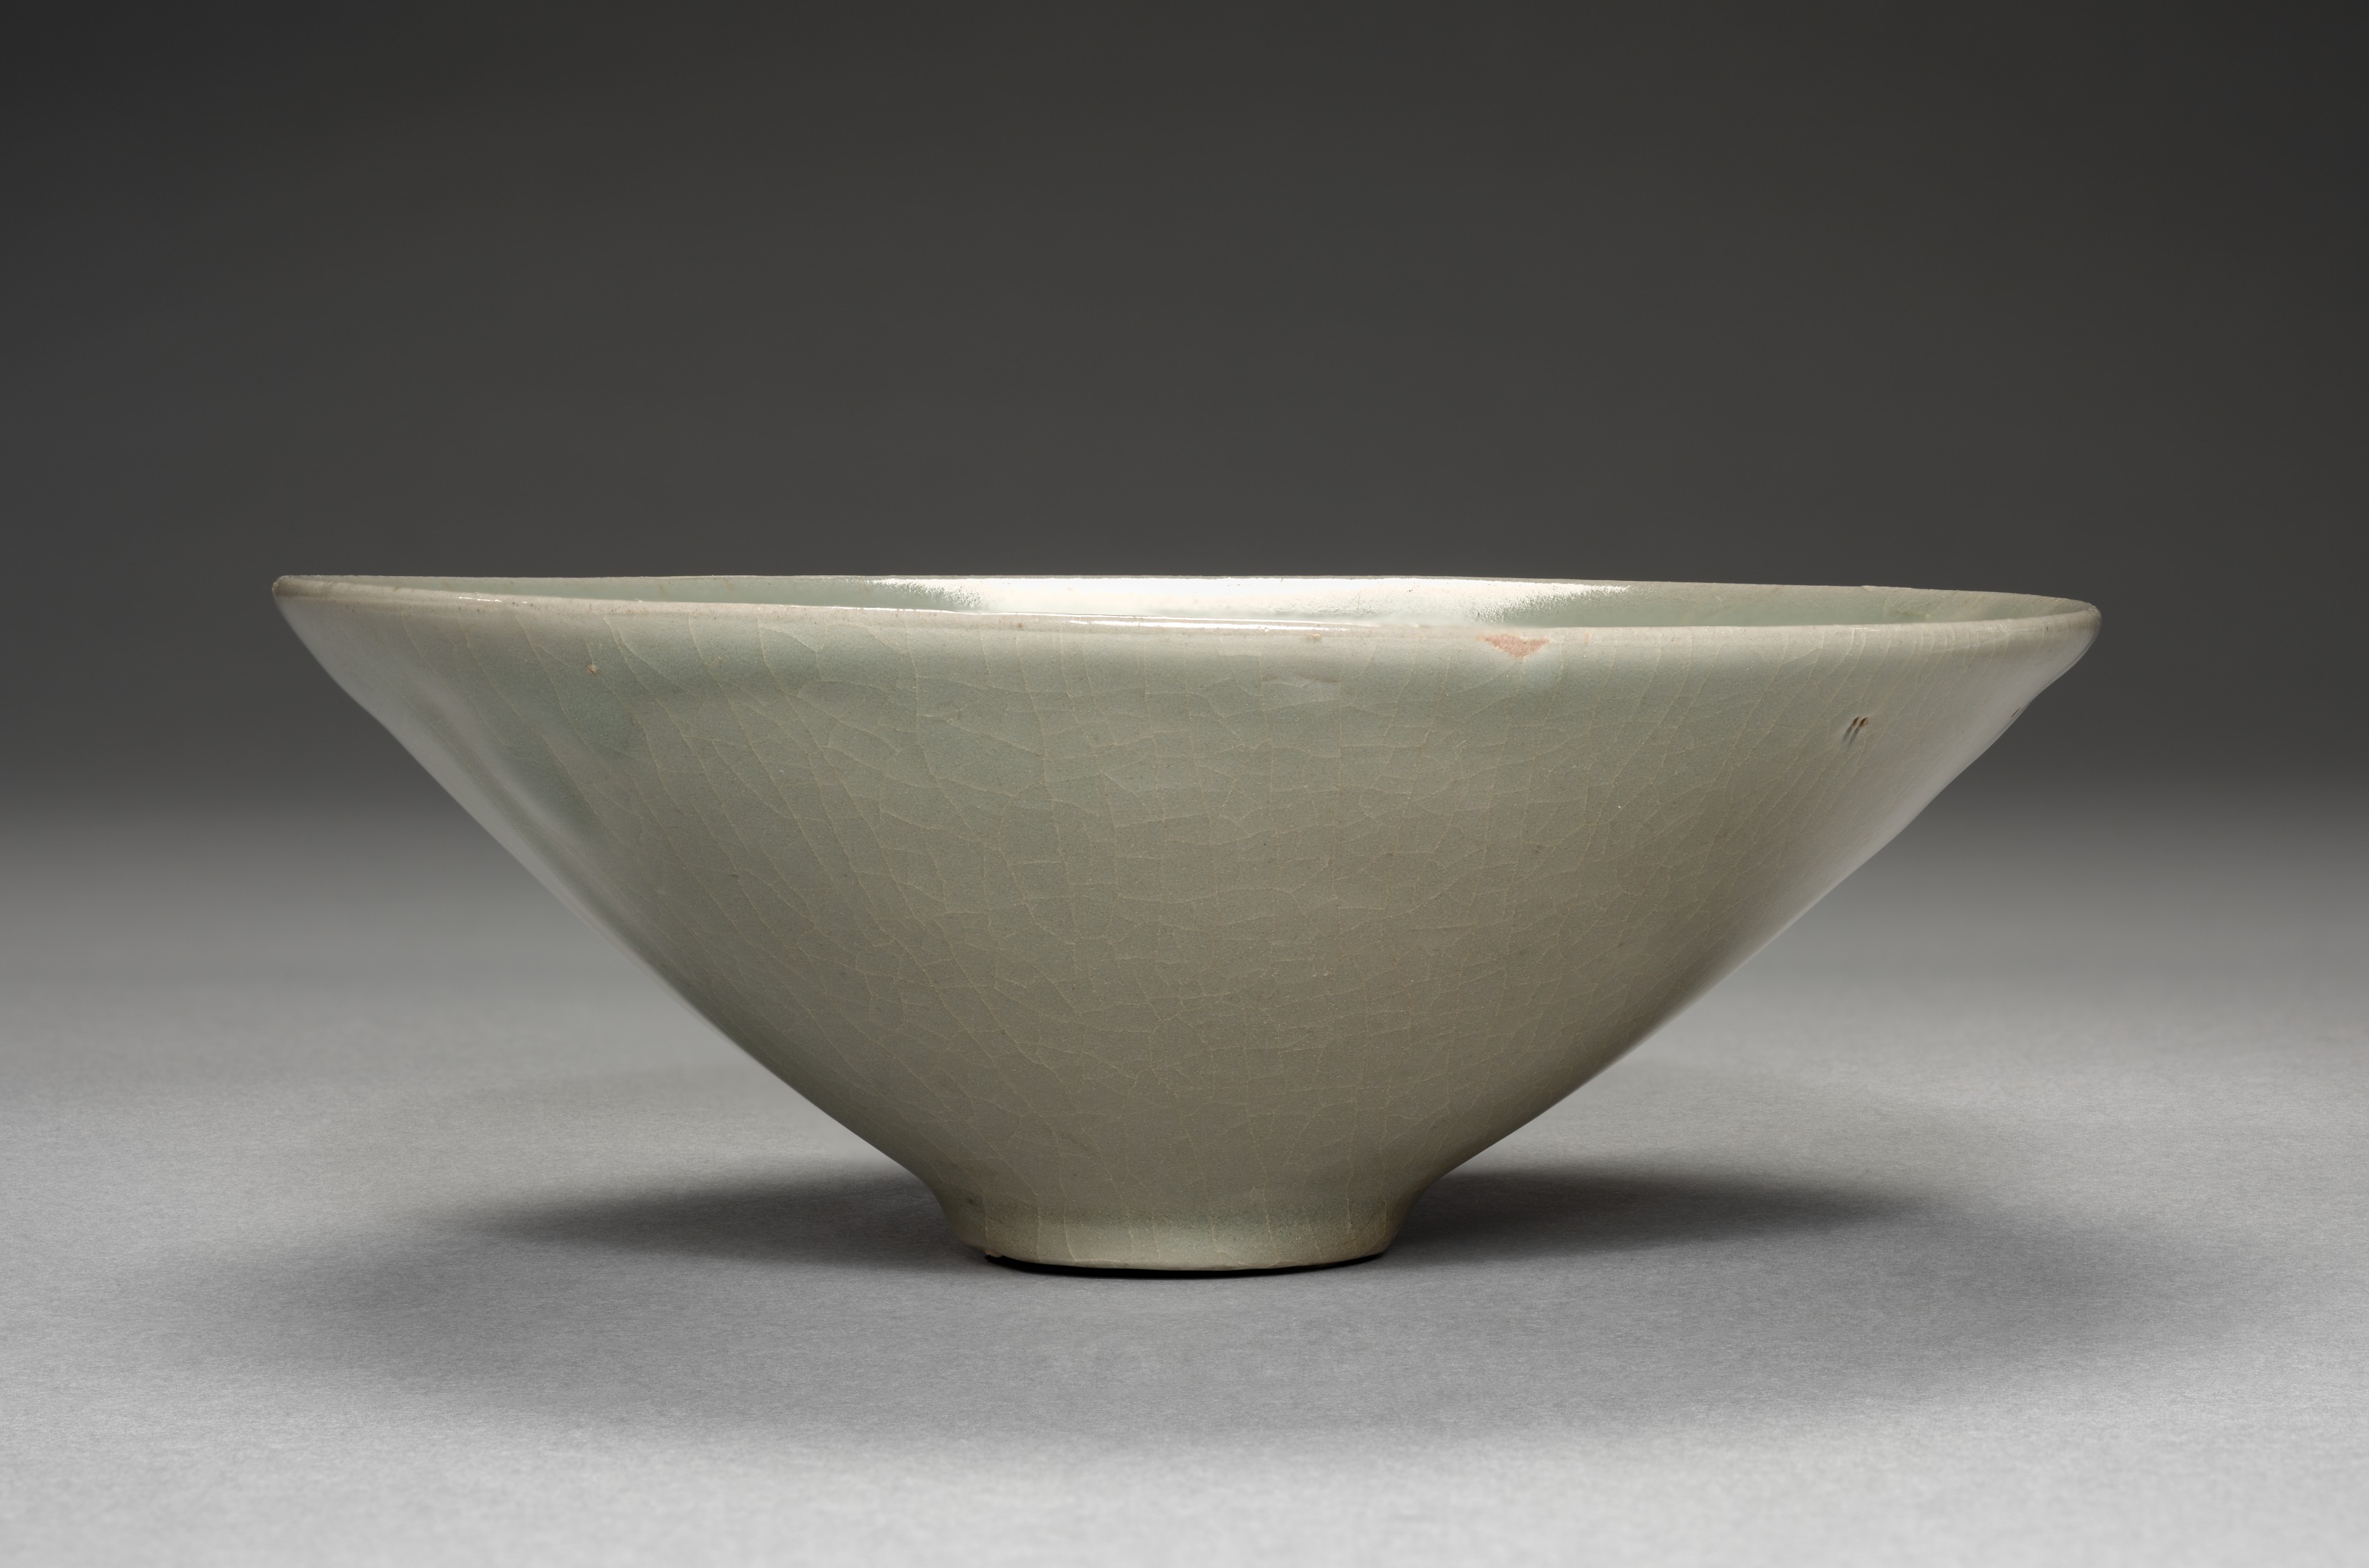 Bowl with Cloud Design in Relief